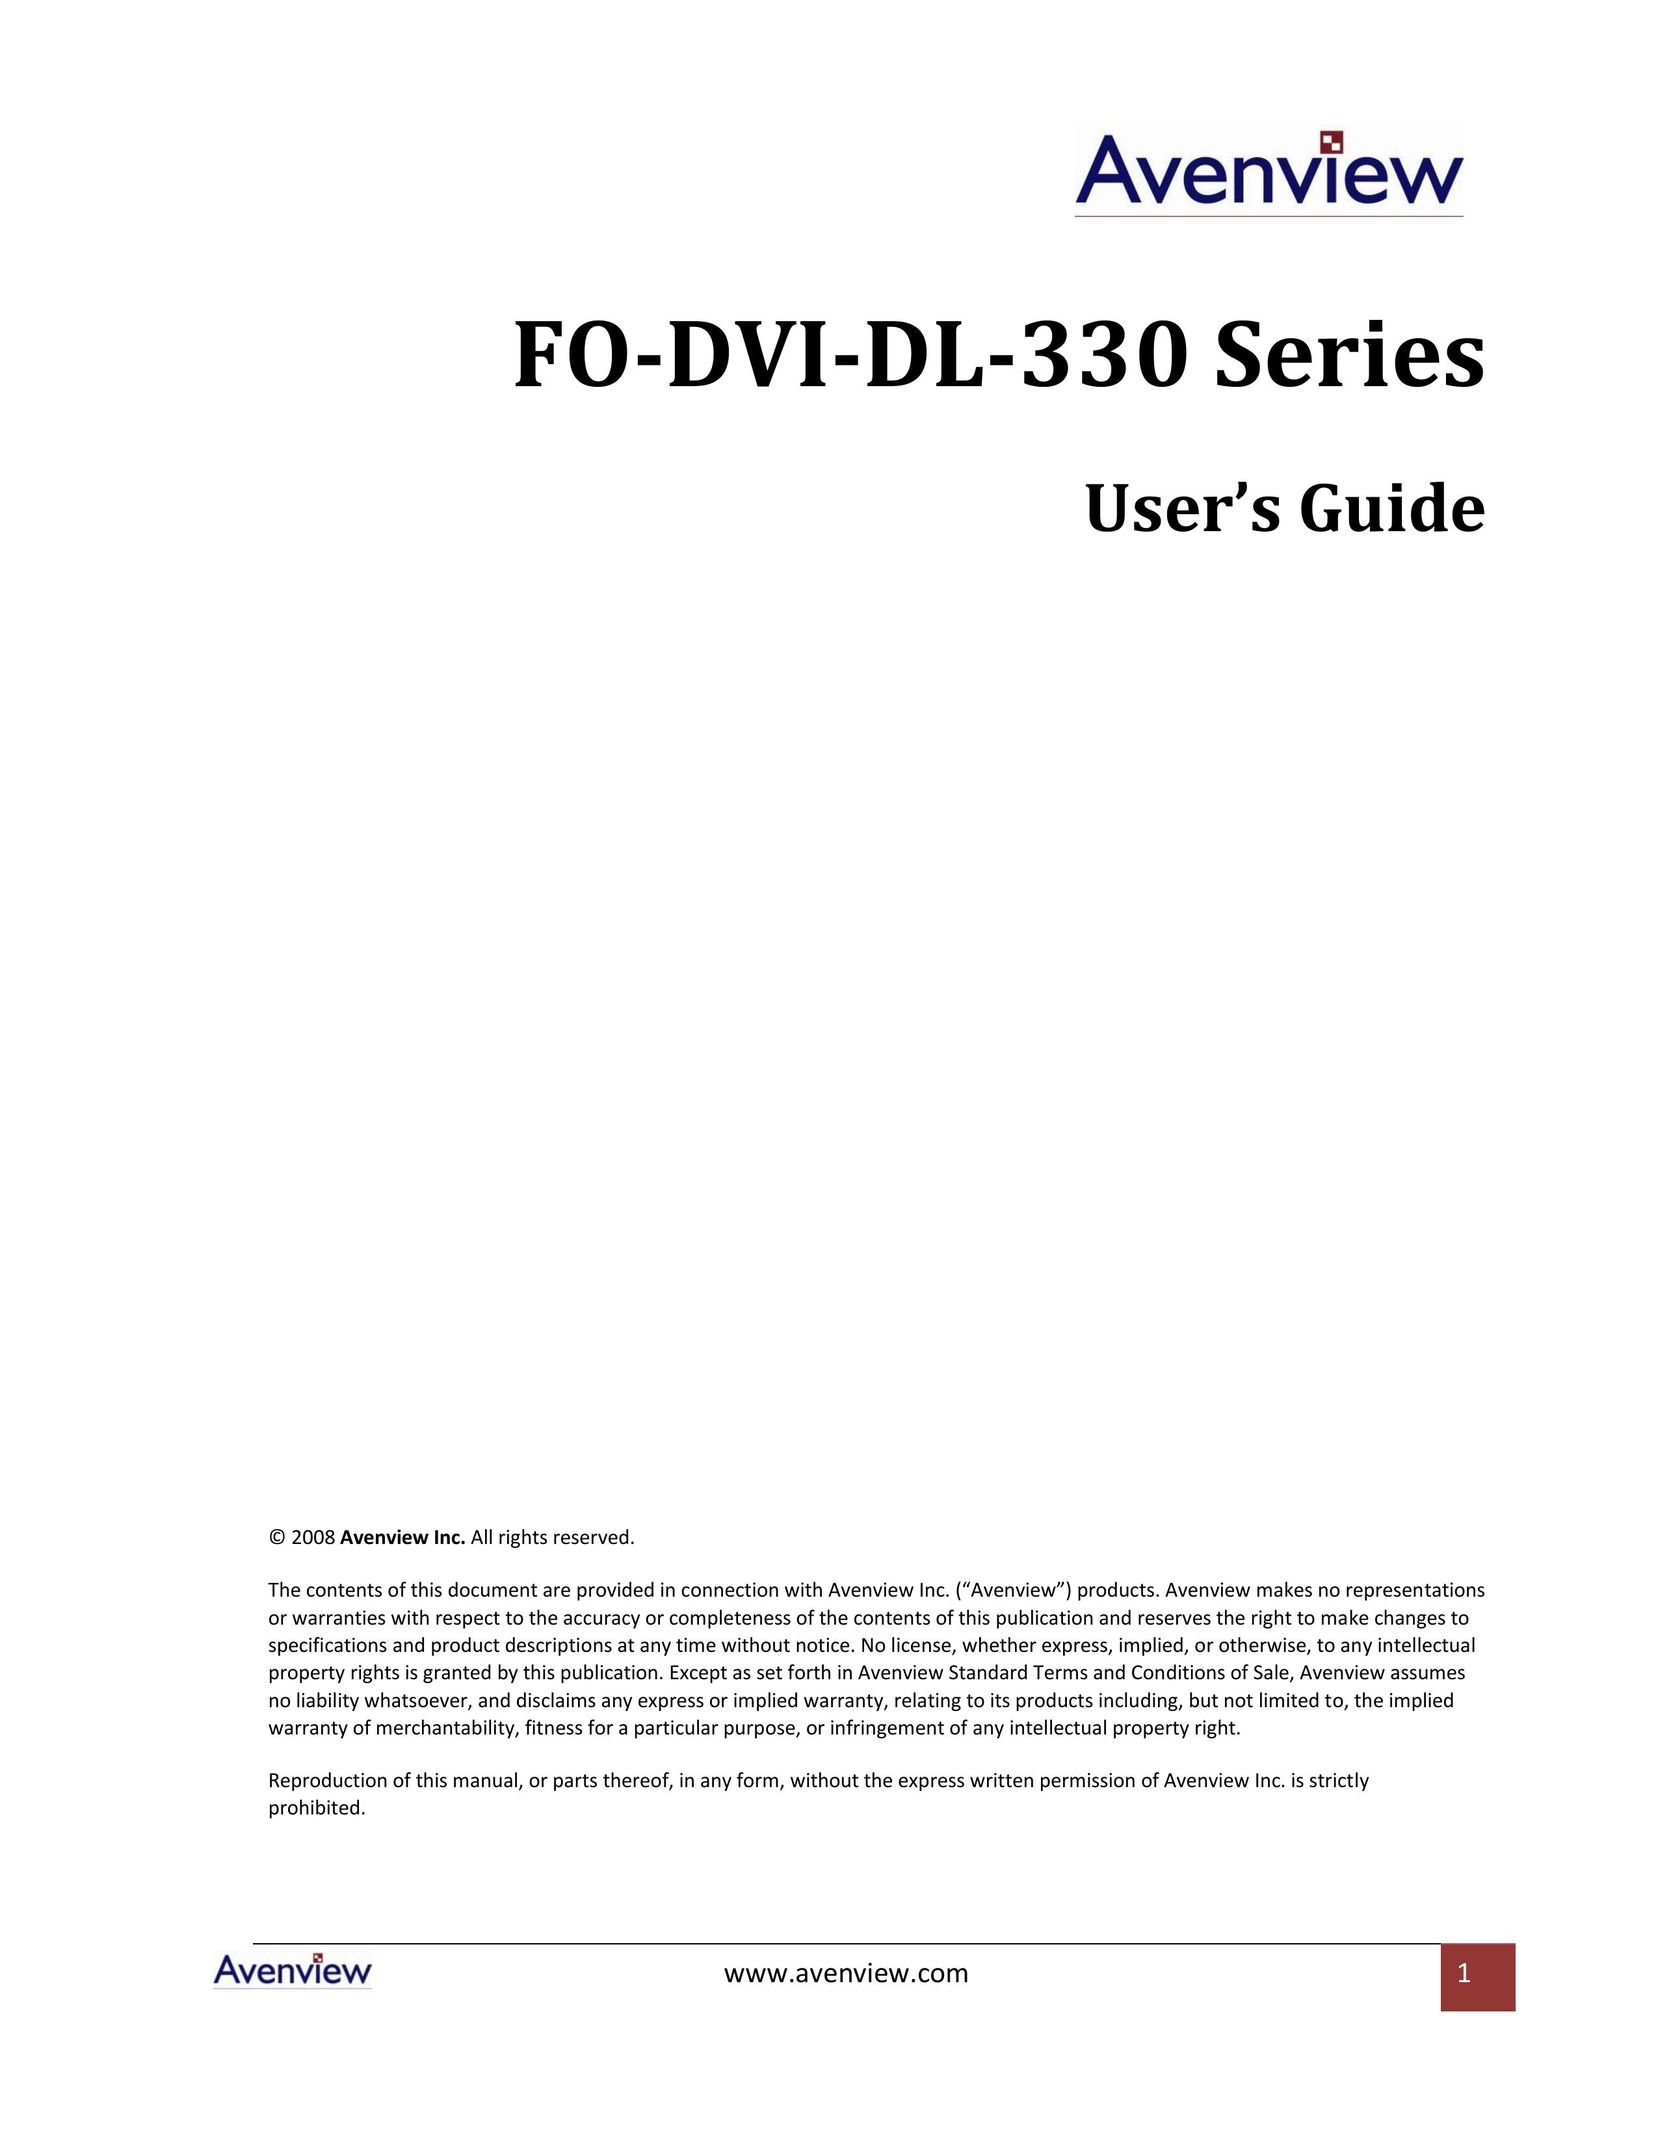 Avenview FO-DVI-DL-330 Series Network Card User Manual